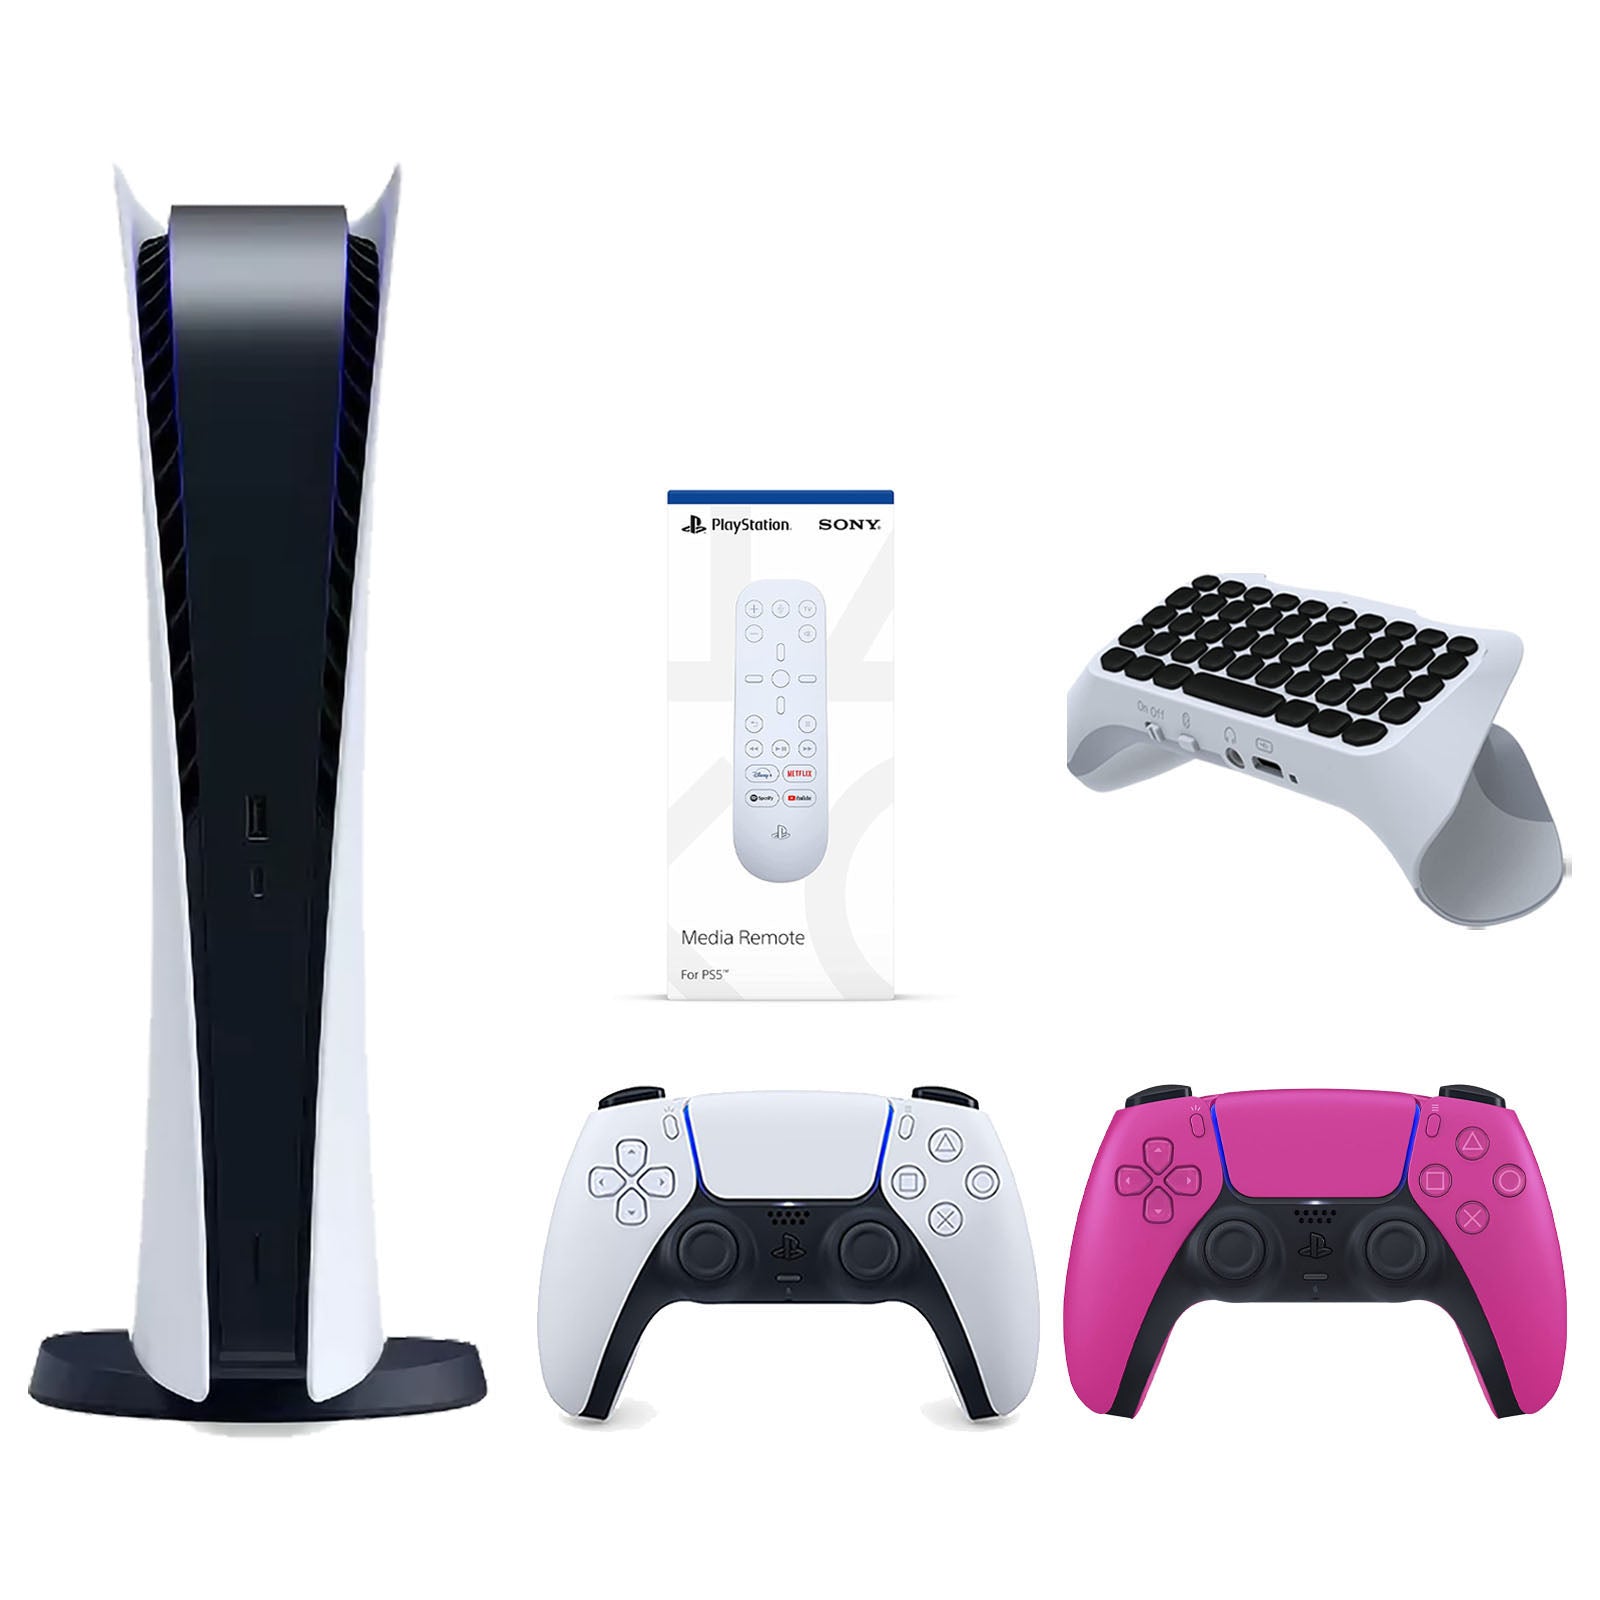 Sony Playstation 5 Digital Edition Console with Extra Pink Controller, Media Remote and Surge QuickType 2.0 Wireless PS5 Controller Keypad Bundle - Pro-Distributing